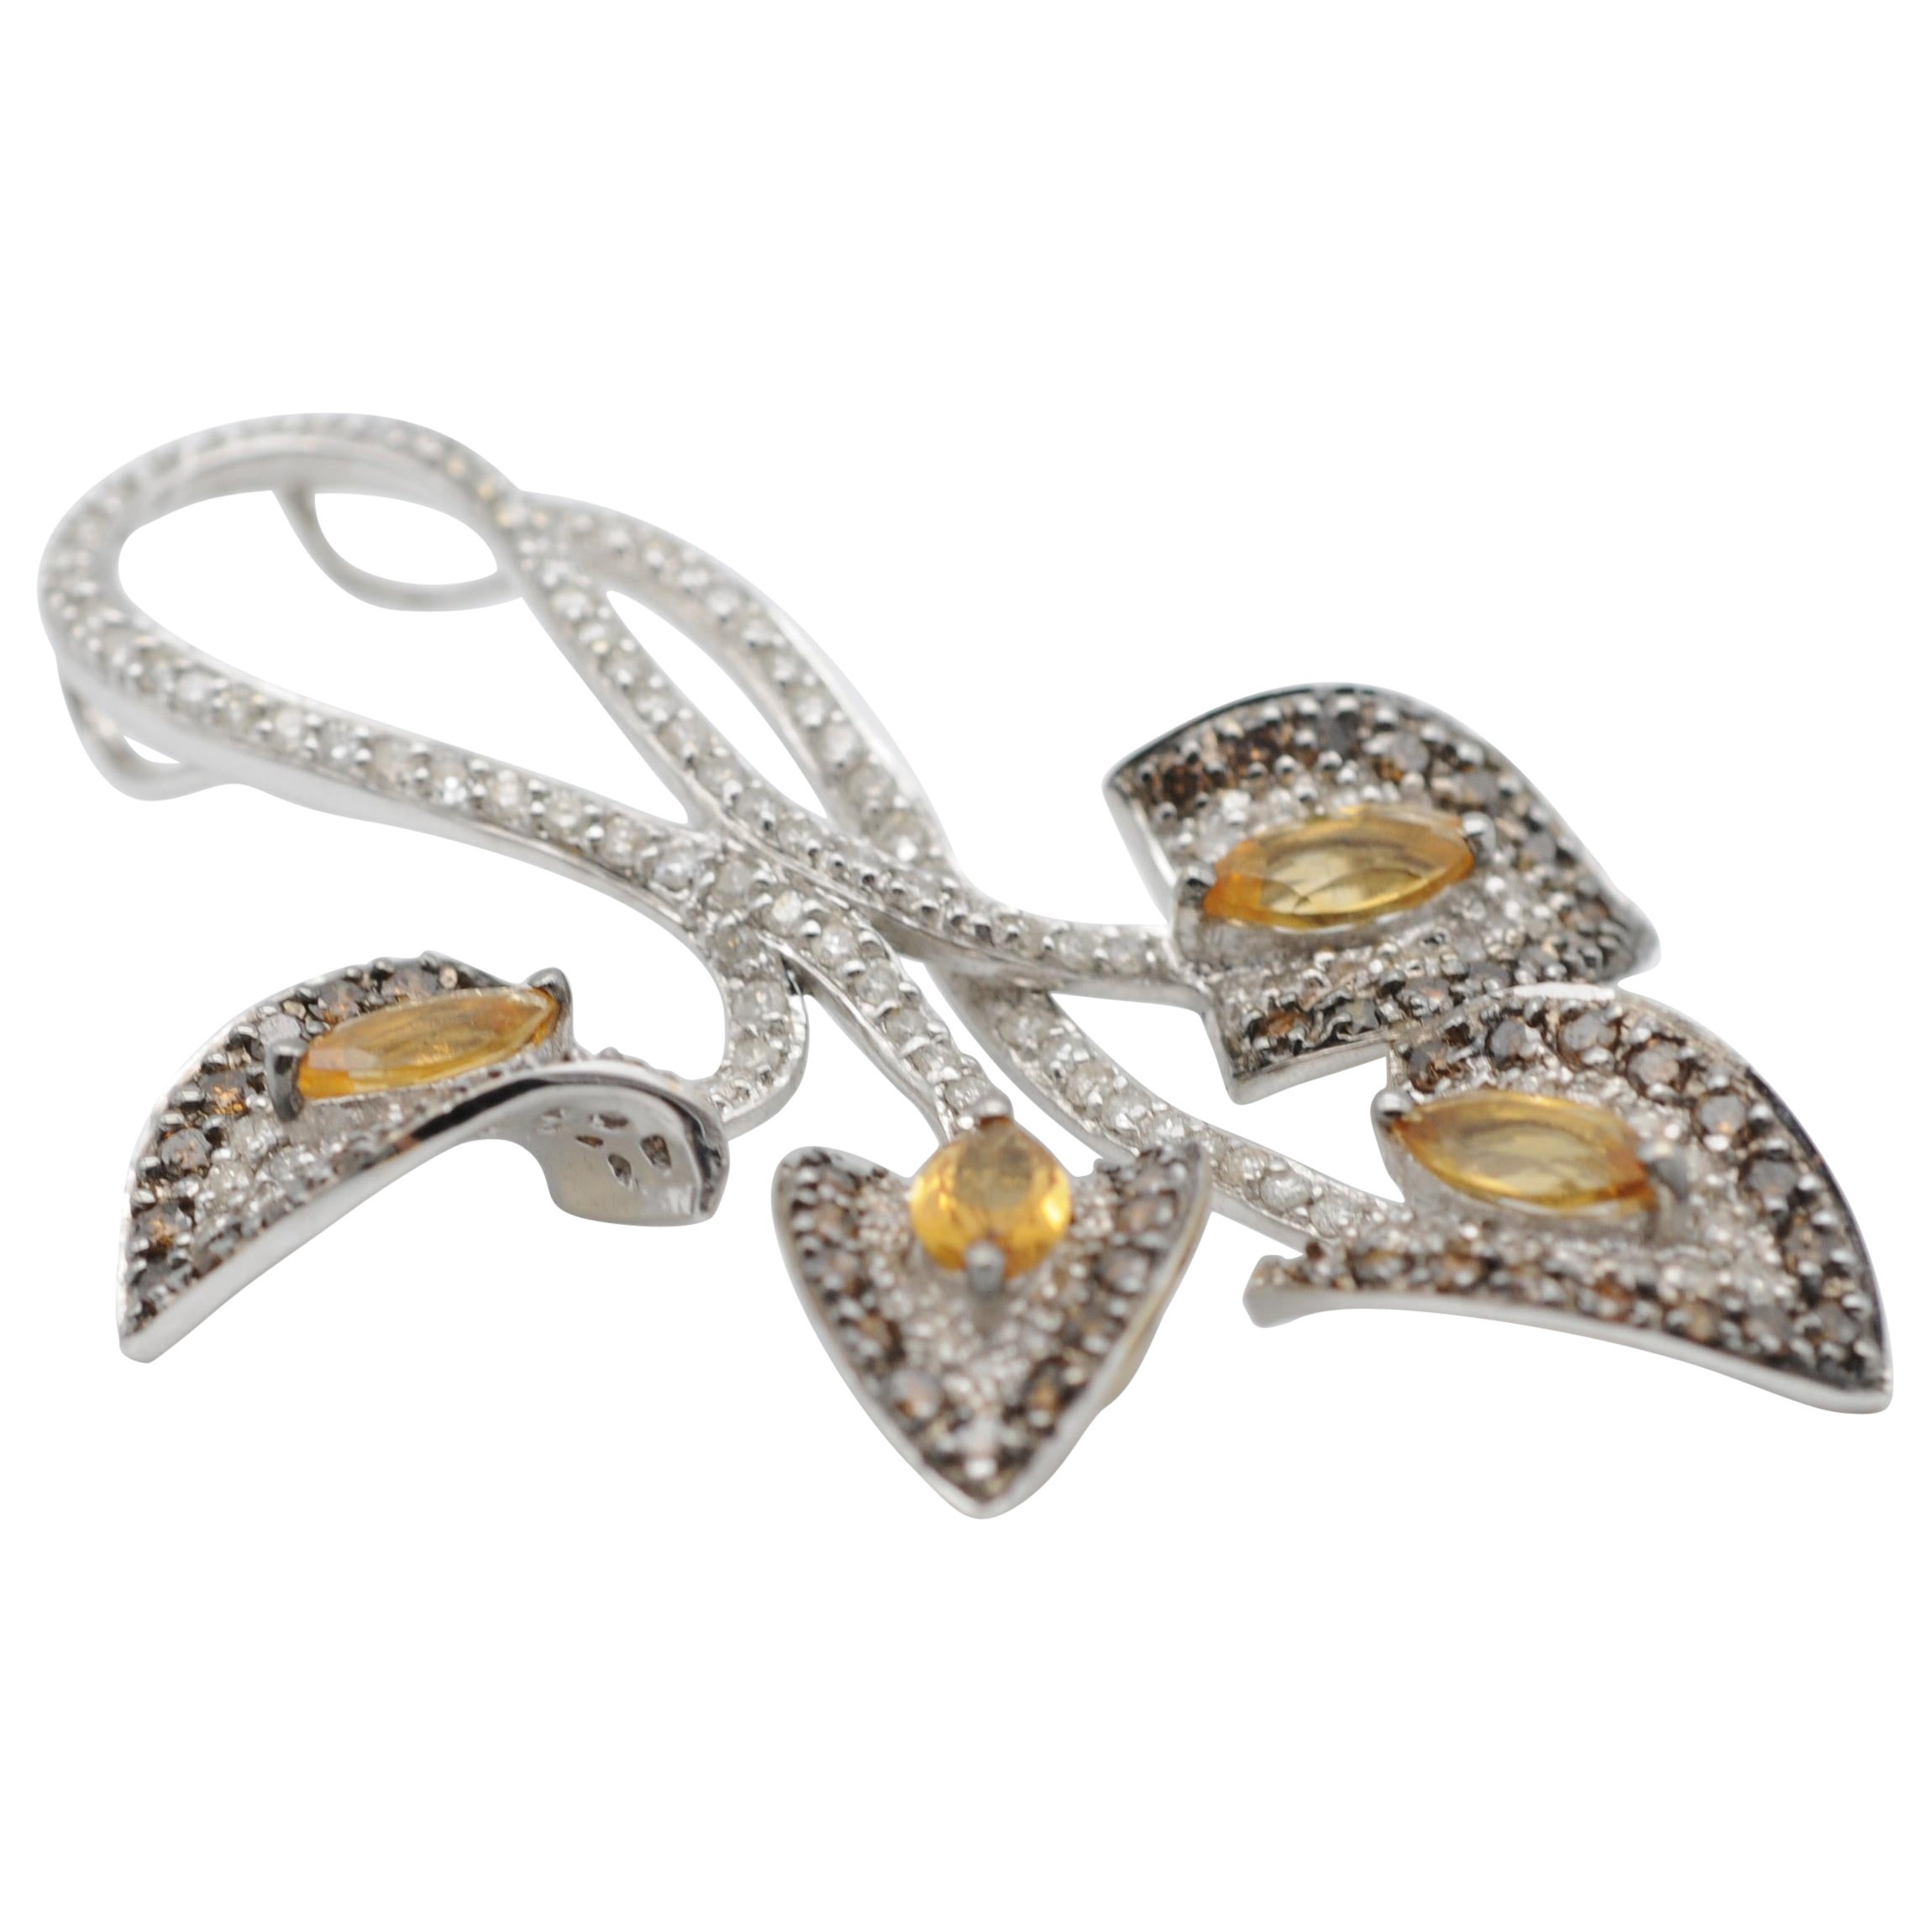 18k White Gold Pendant with Fully Set Diamonds and Navette-Cut Citrines